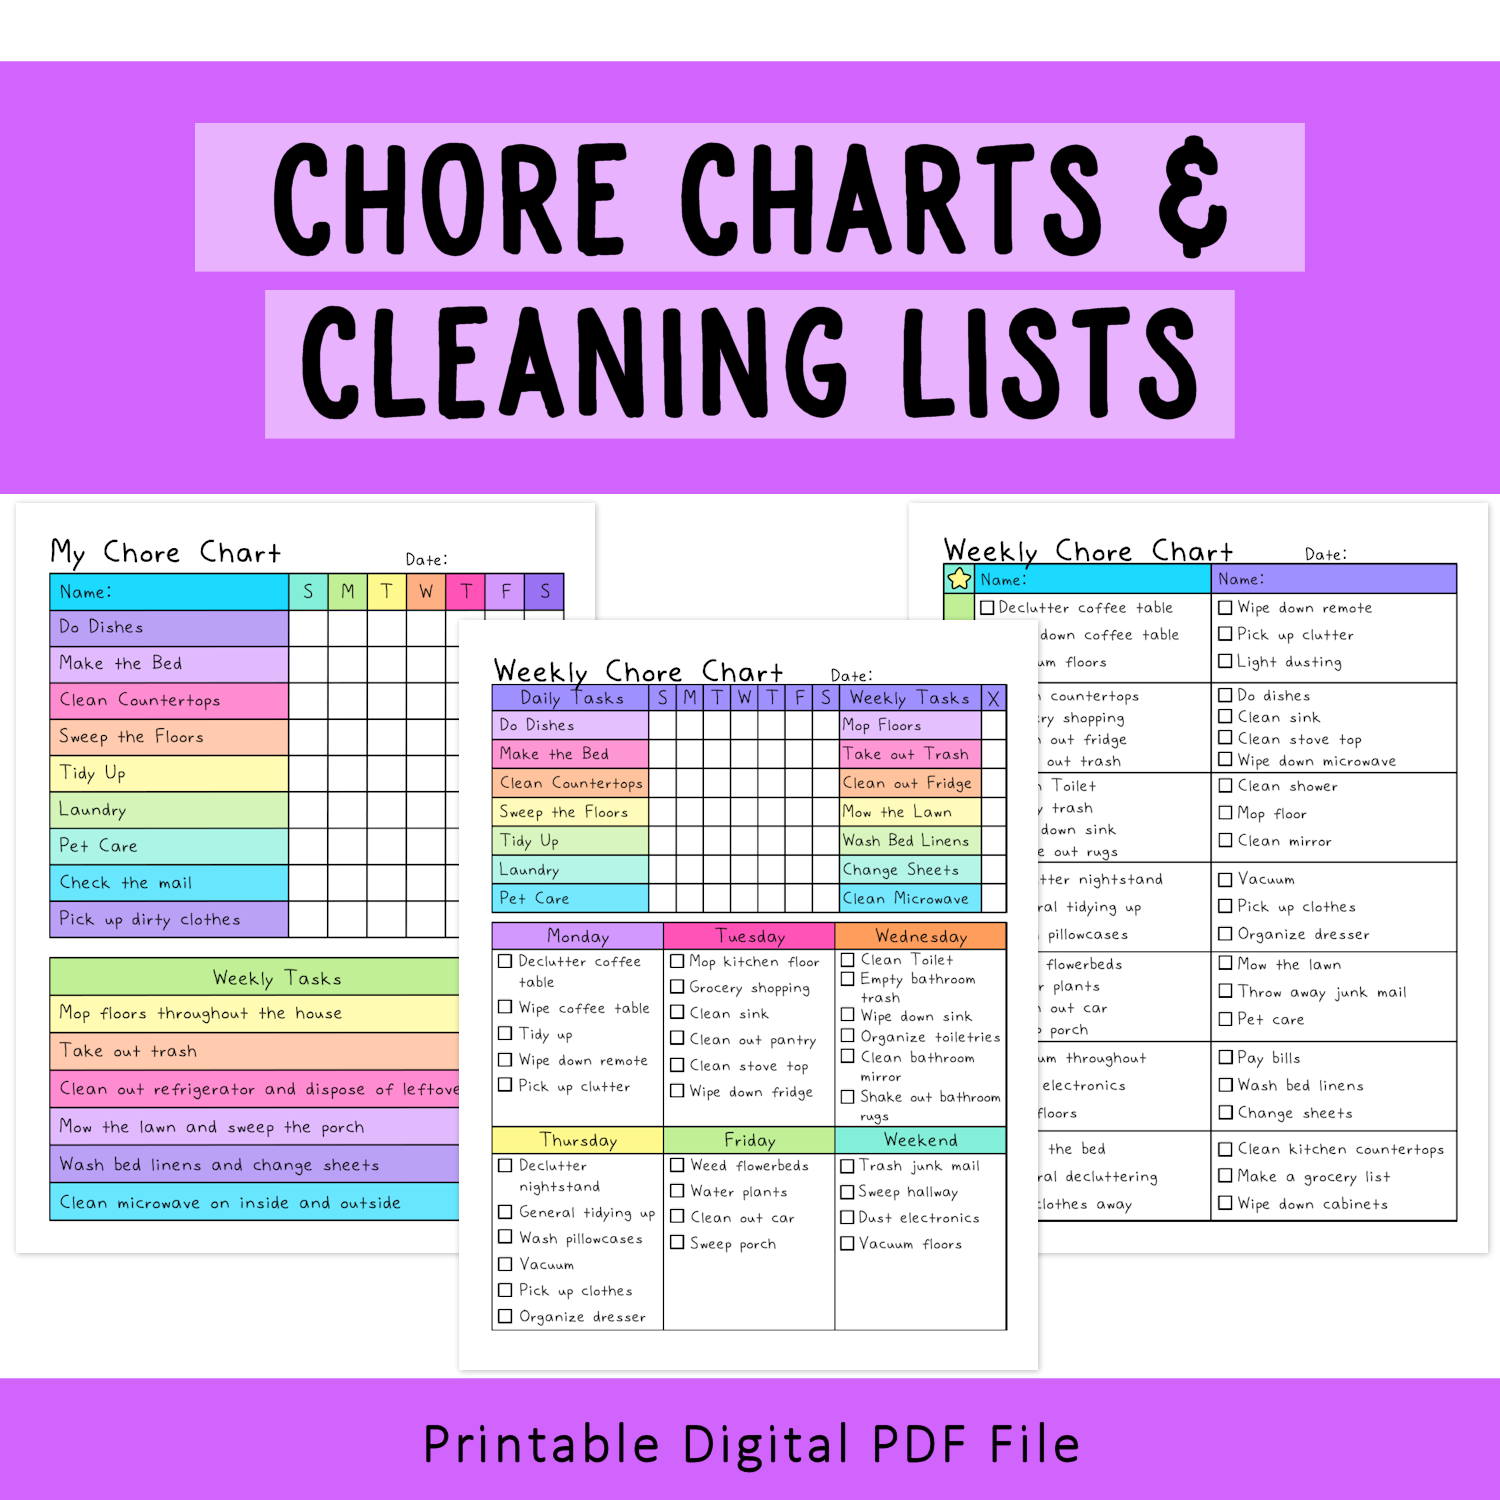 Cleaning Lists & Chore Charts